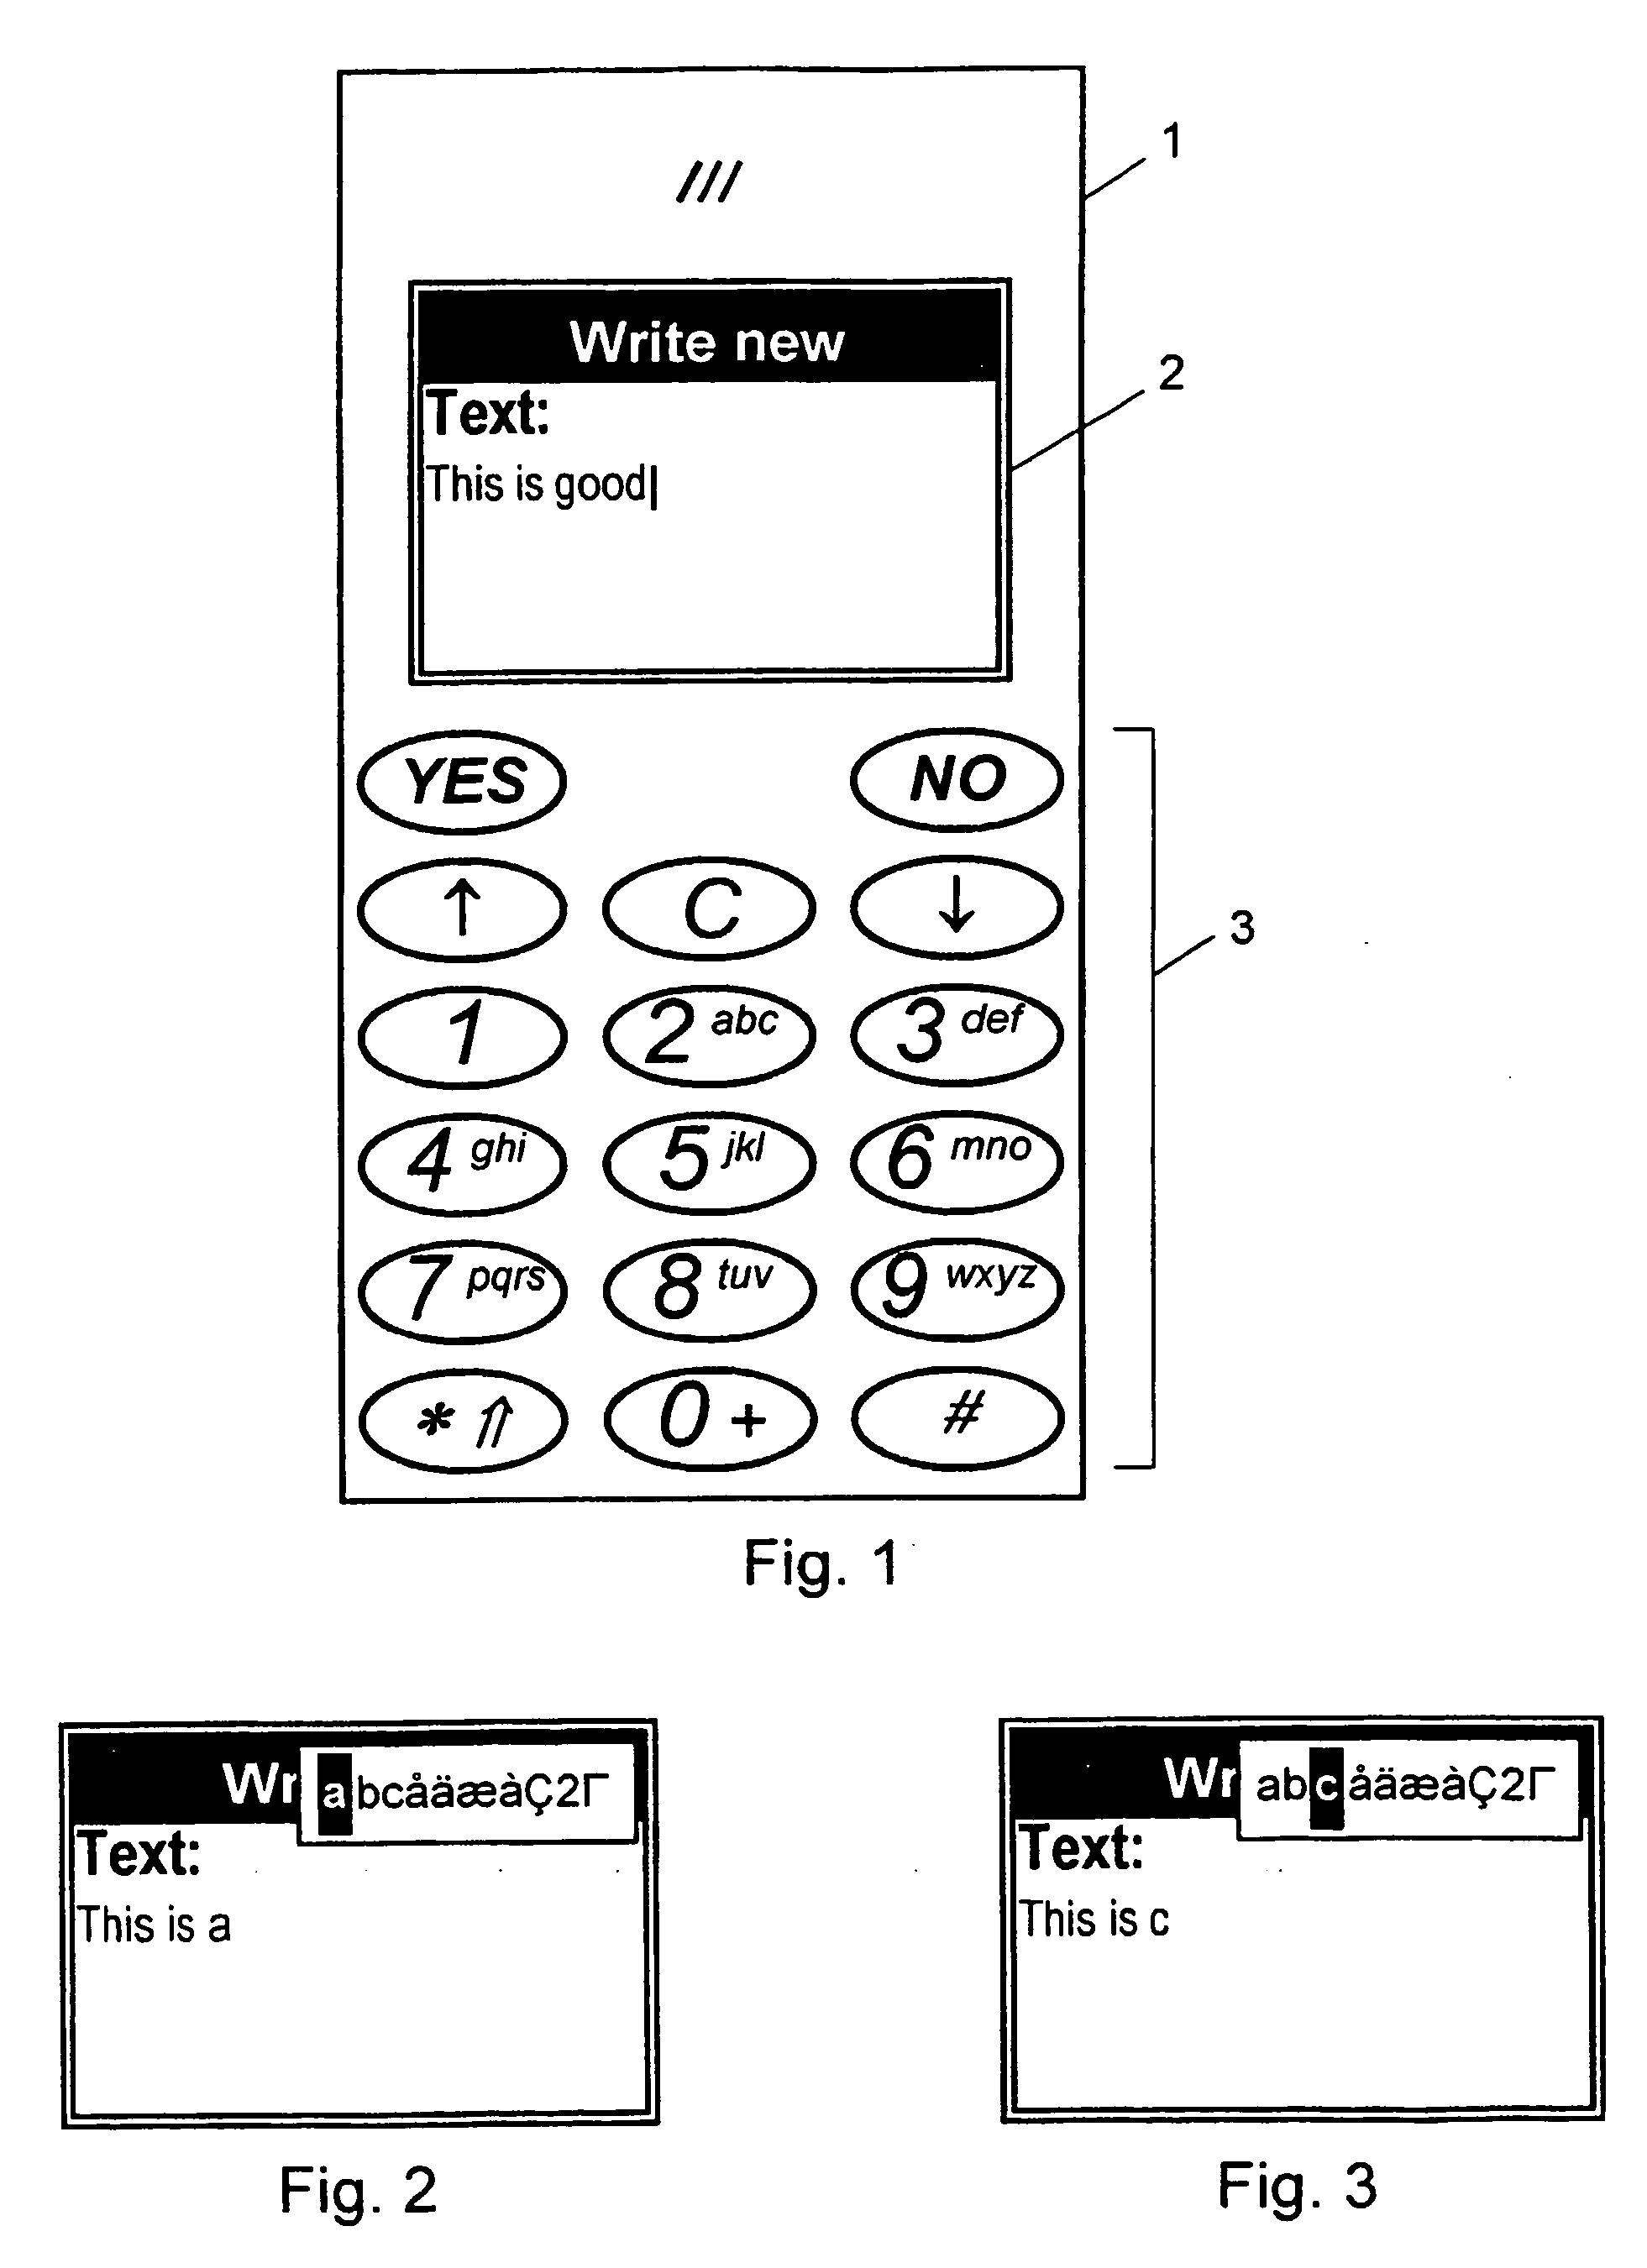 Entering text into an electronic communications device